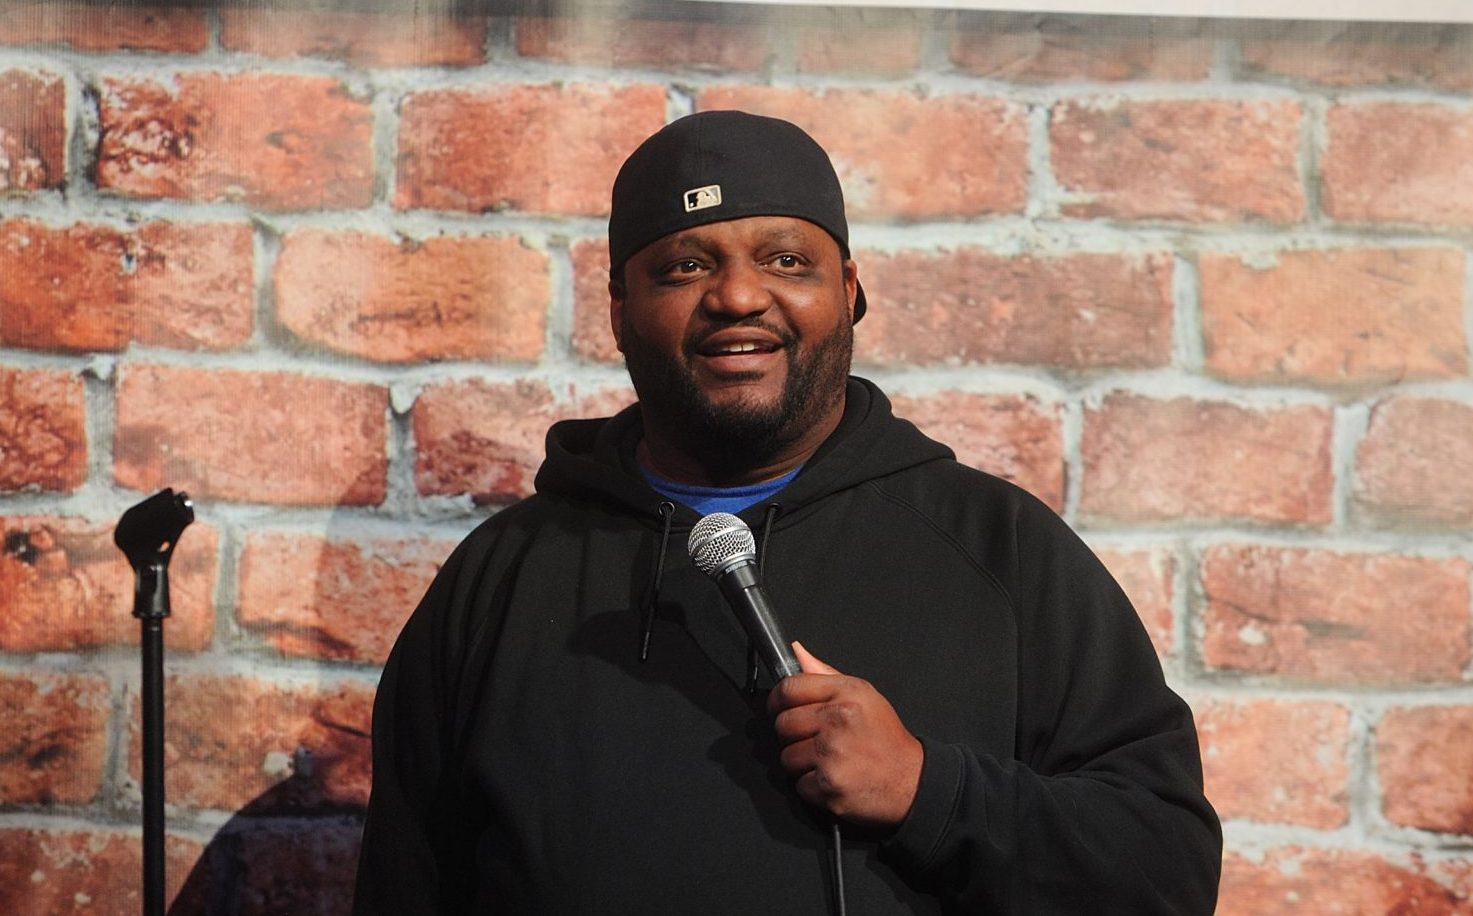 Aries Spears speaks out in a new episode of his podcast about the lawsuit filed against him after he is accused of sexual child abuse.